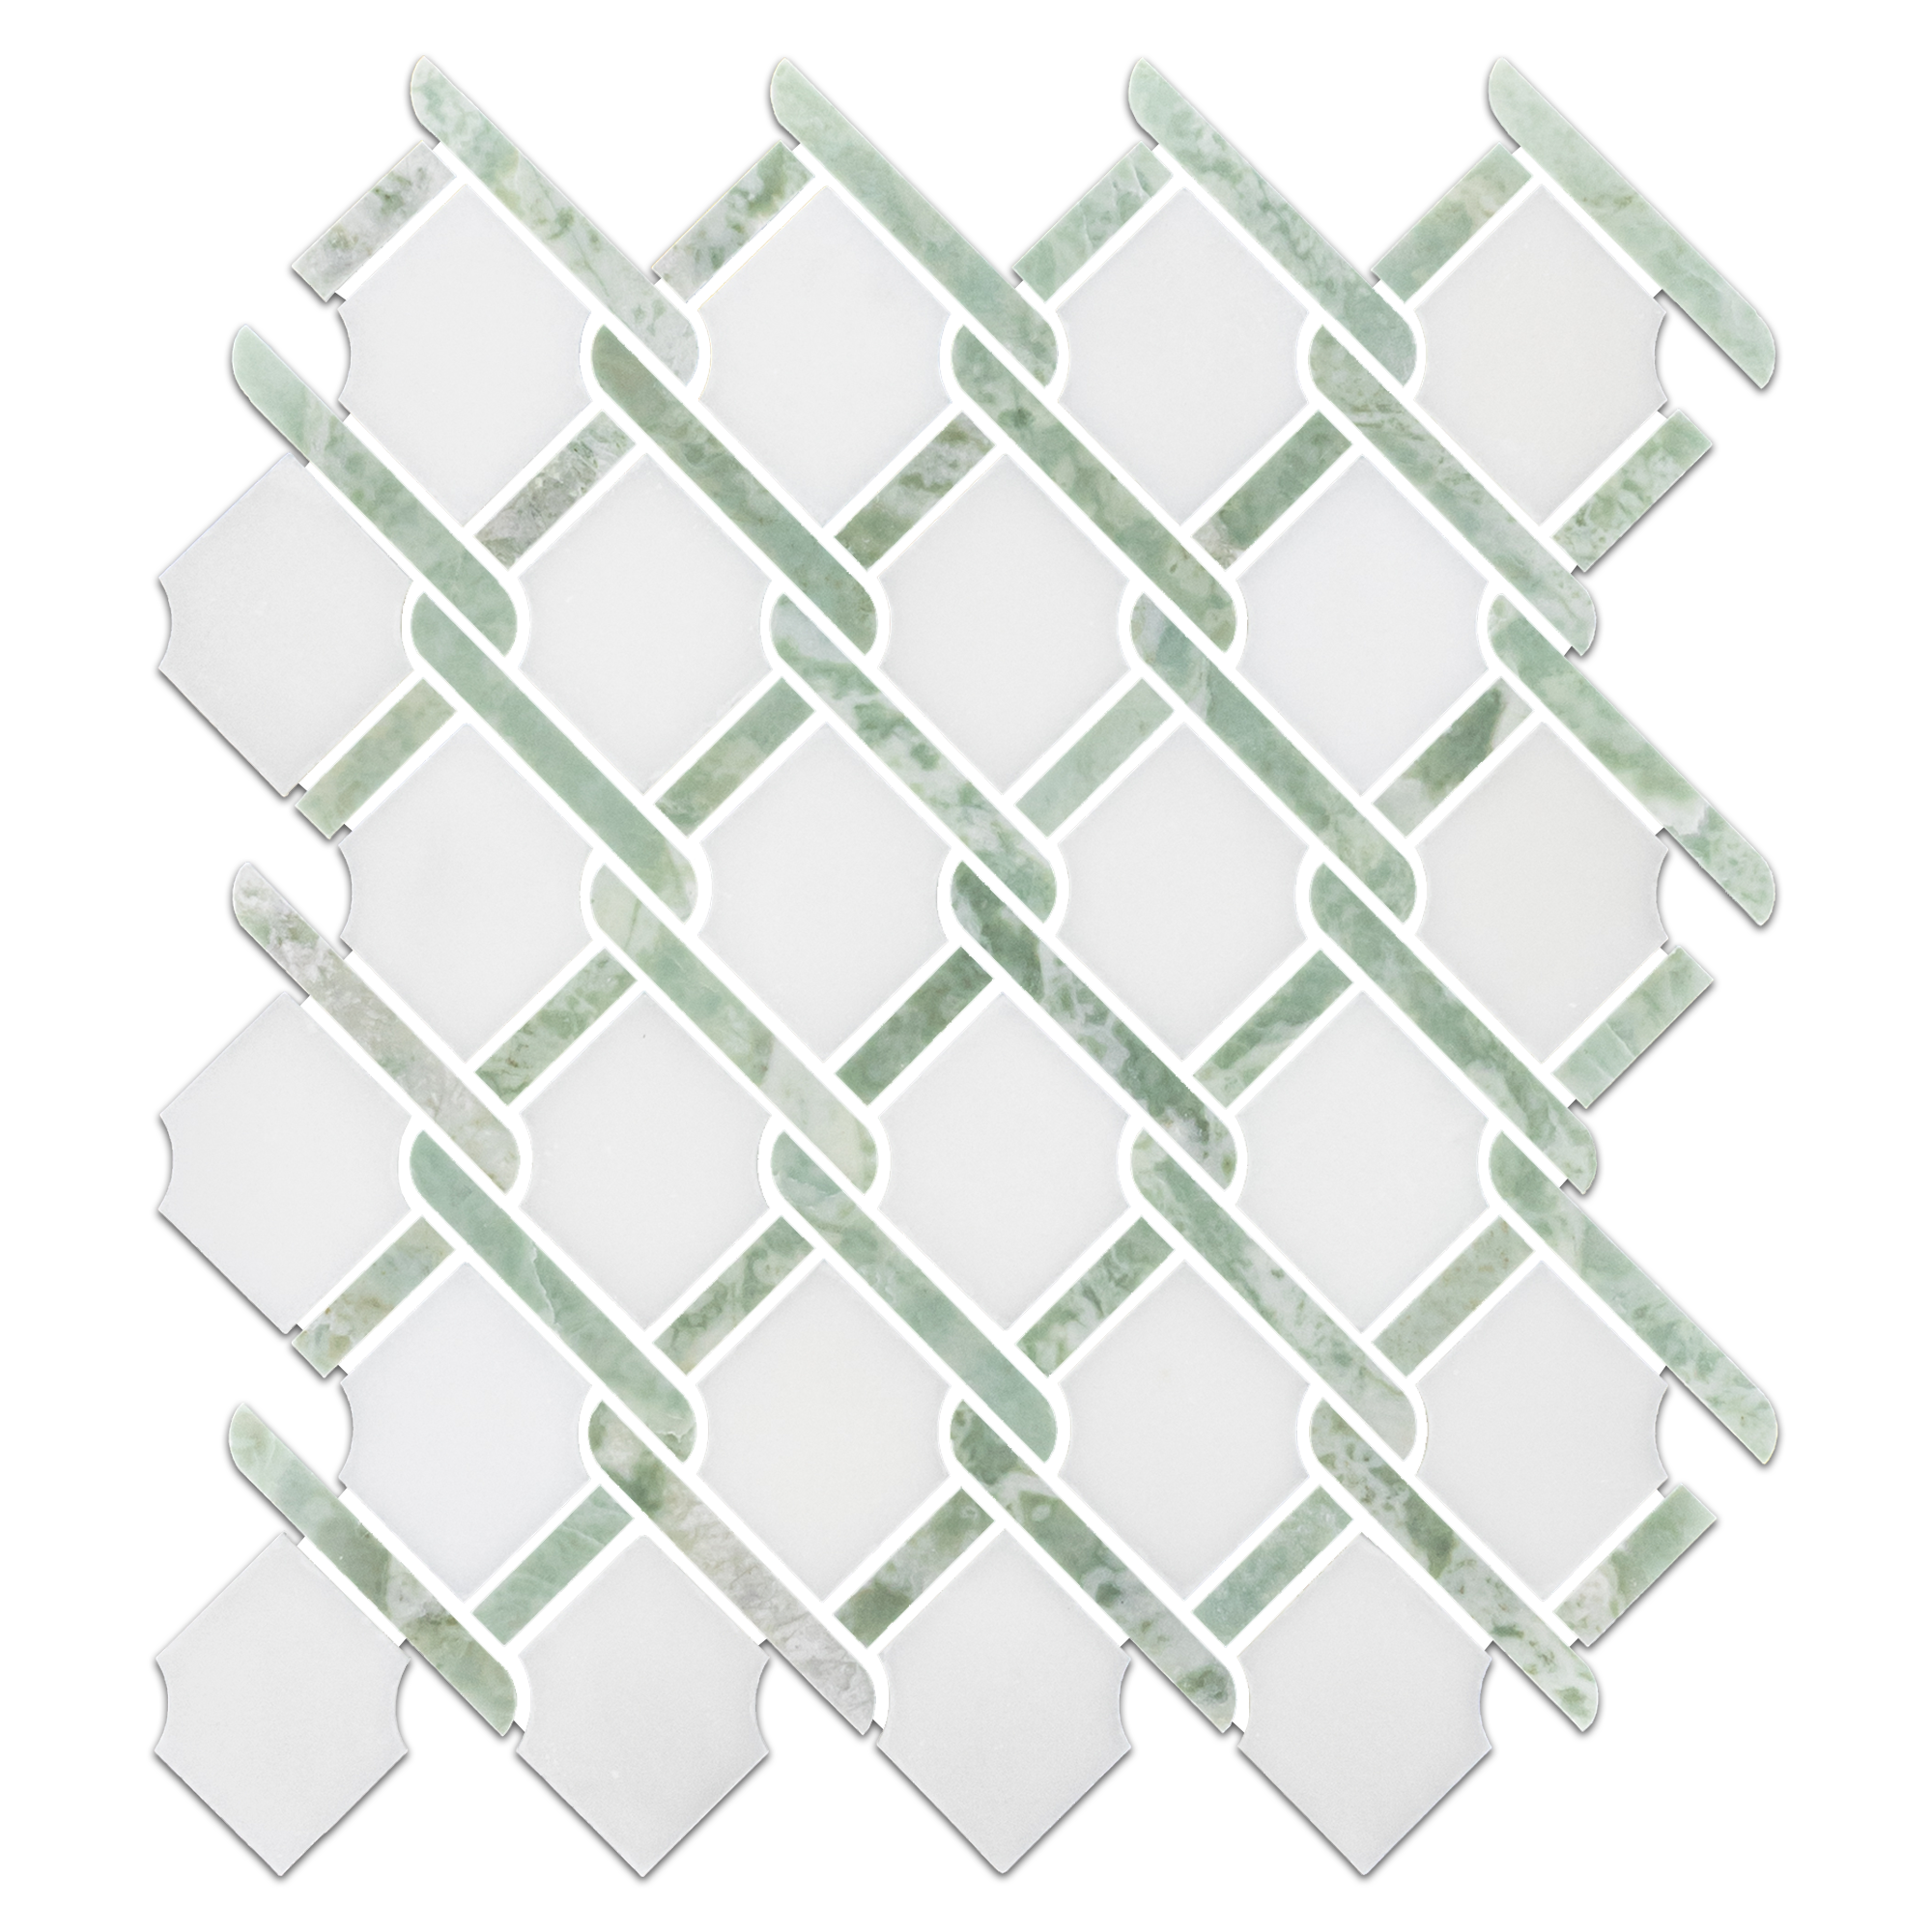 Elon Absolute White Emerald Green Marble Argyle Field Mosaic Tile, 11x12 Polished Finish